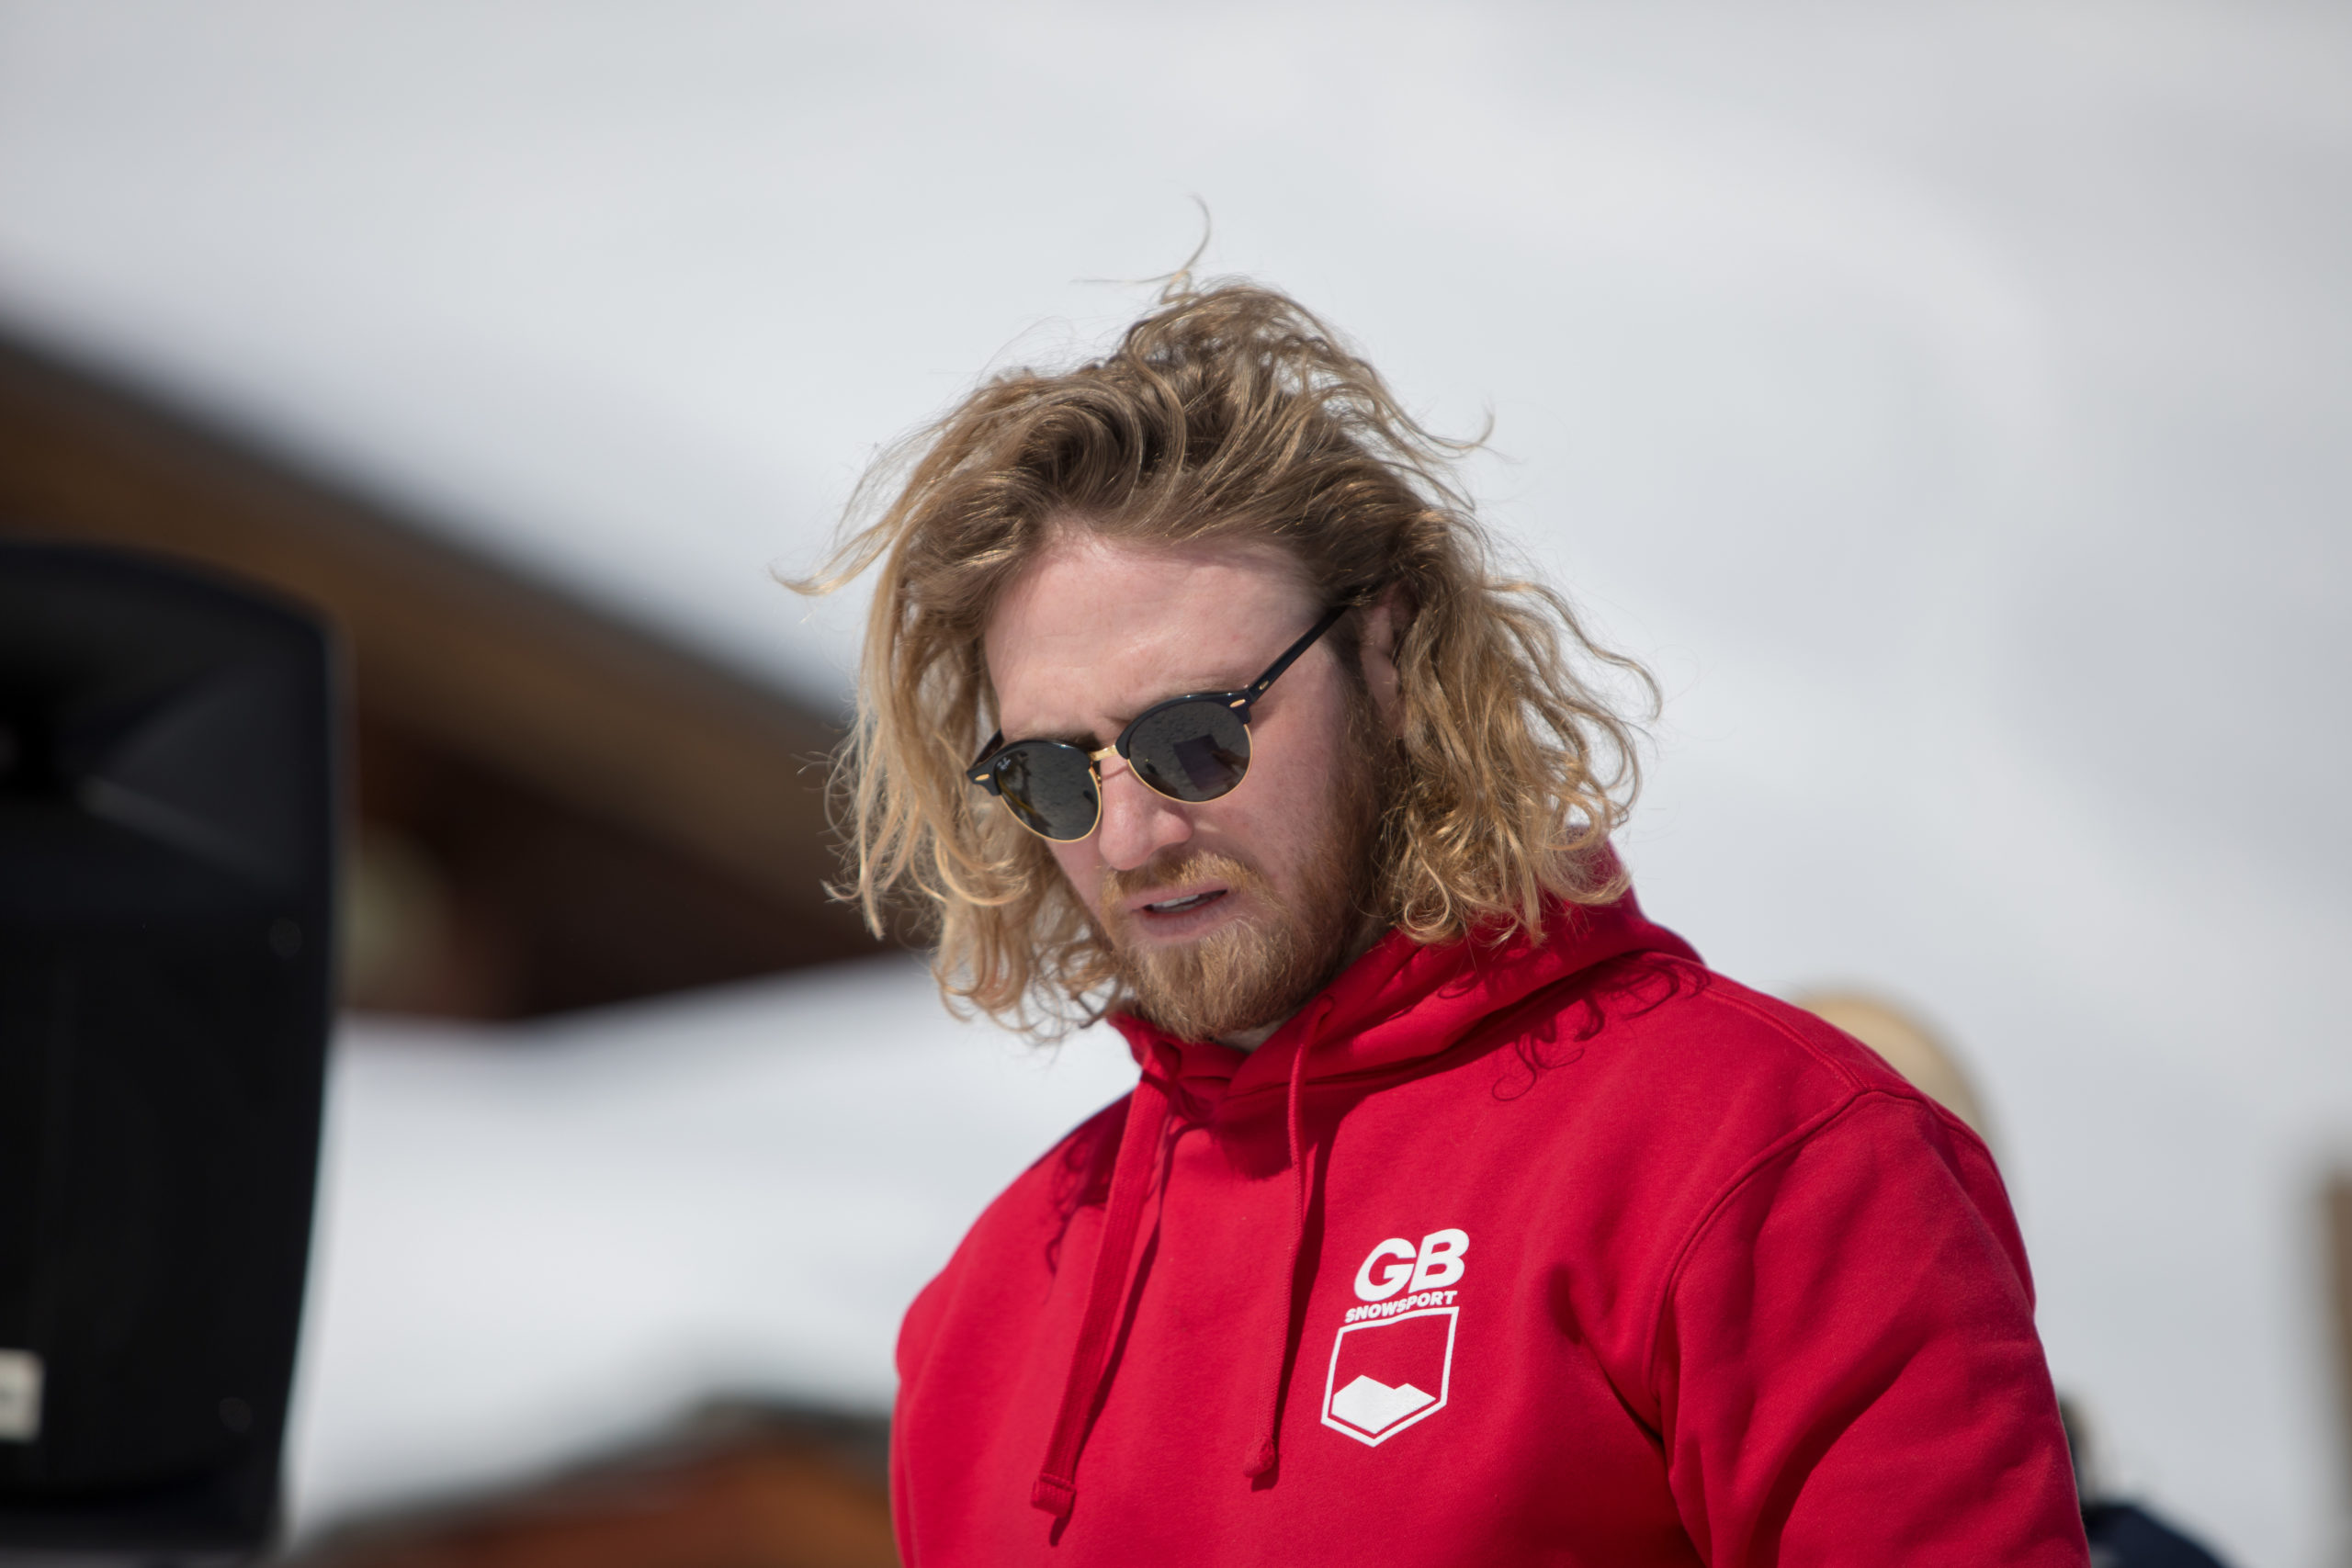 A CHAT WITH ED DRAKE, HOST OF THE SKI RACING PODCAST